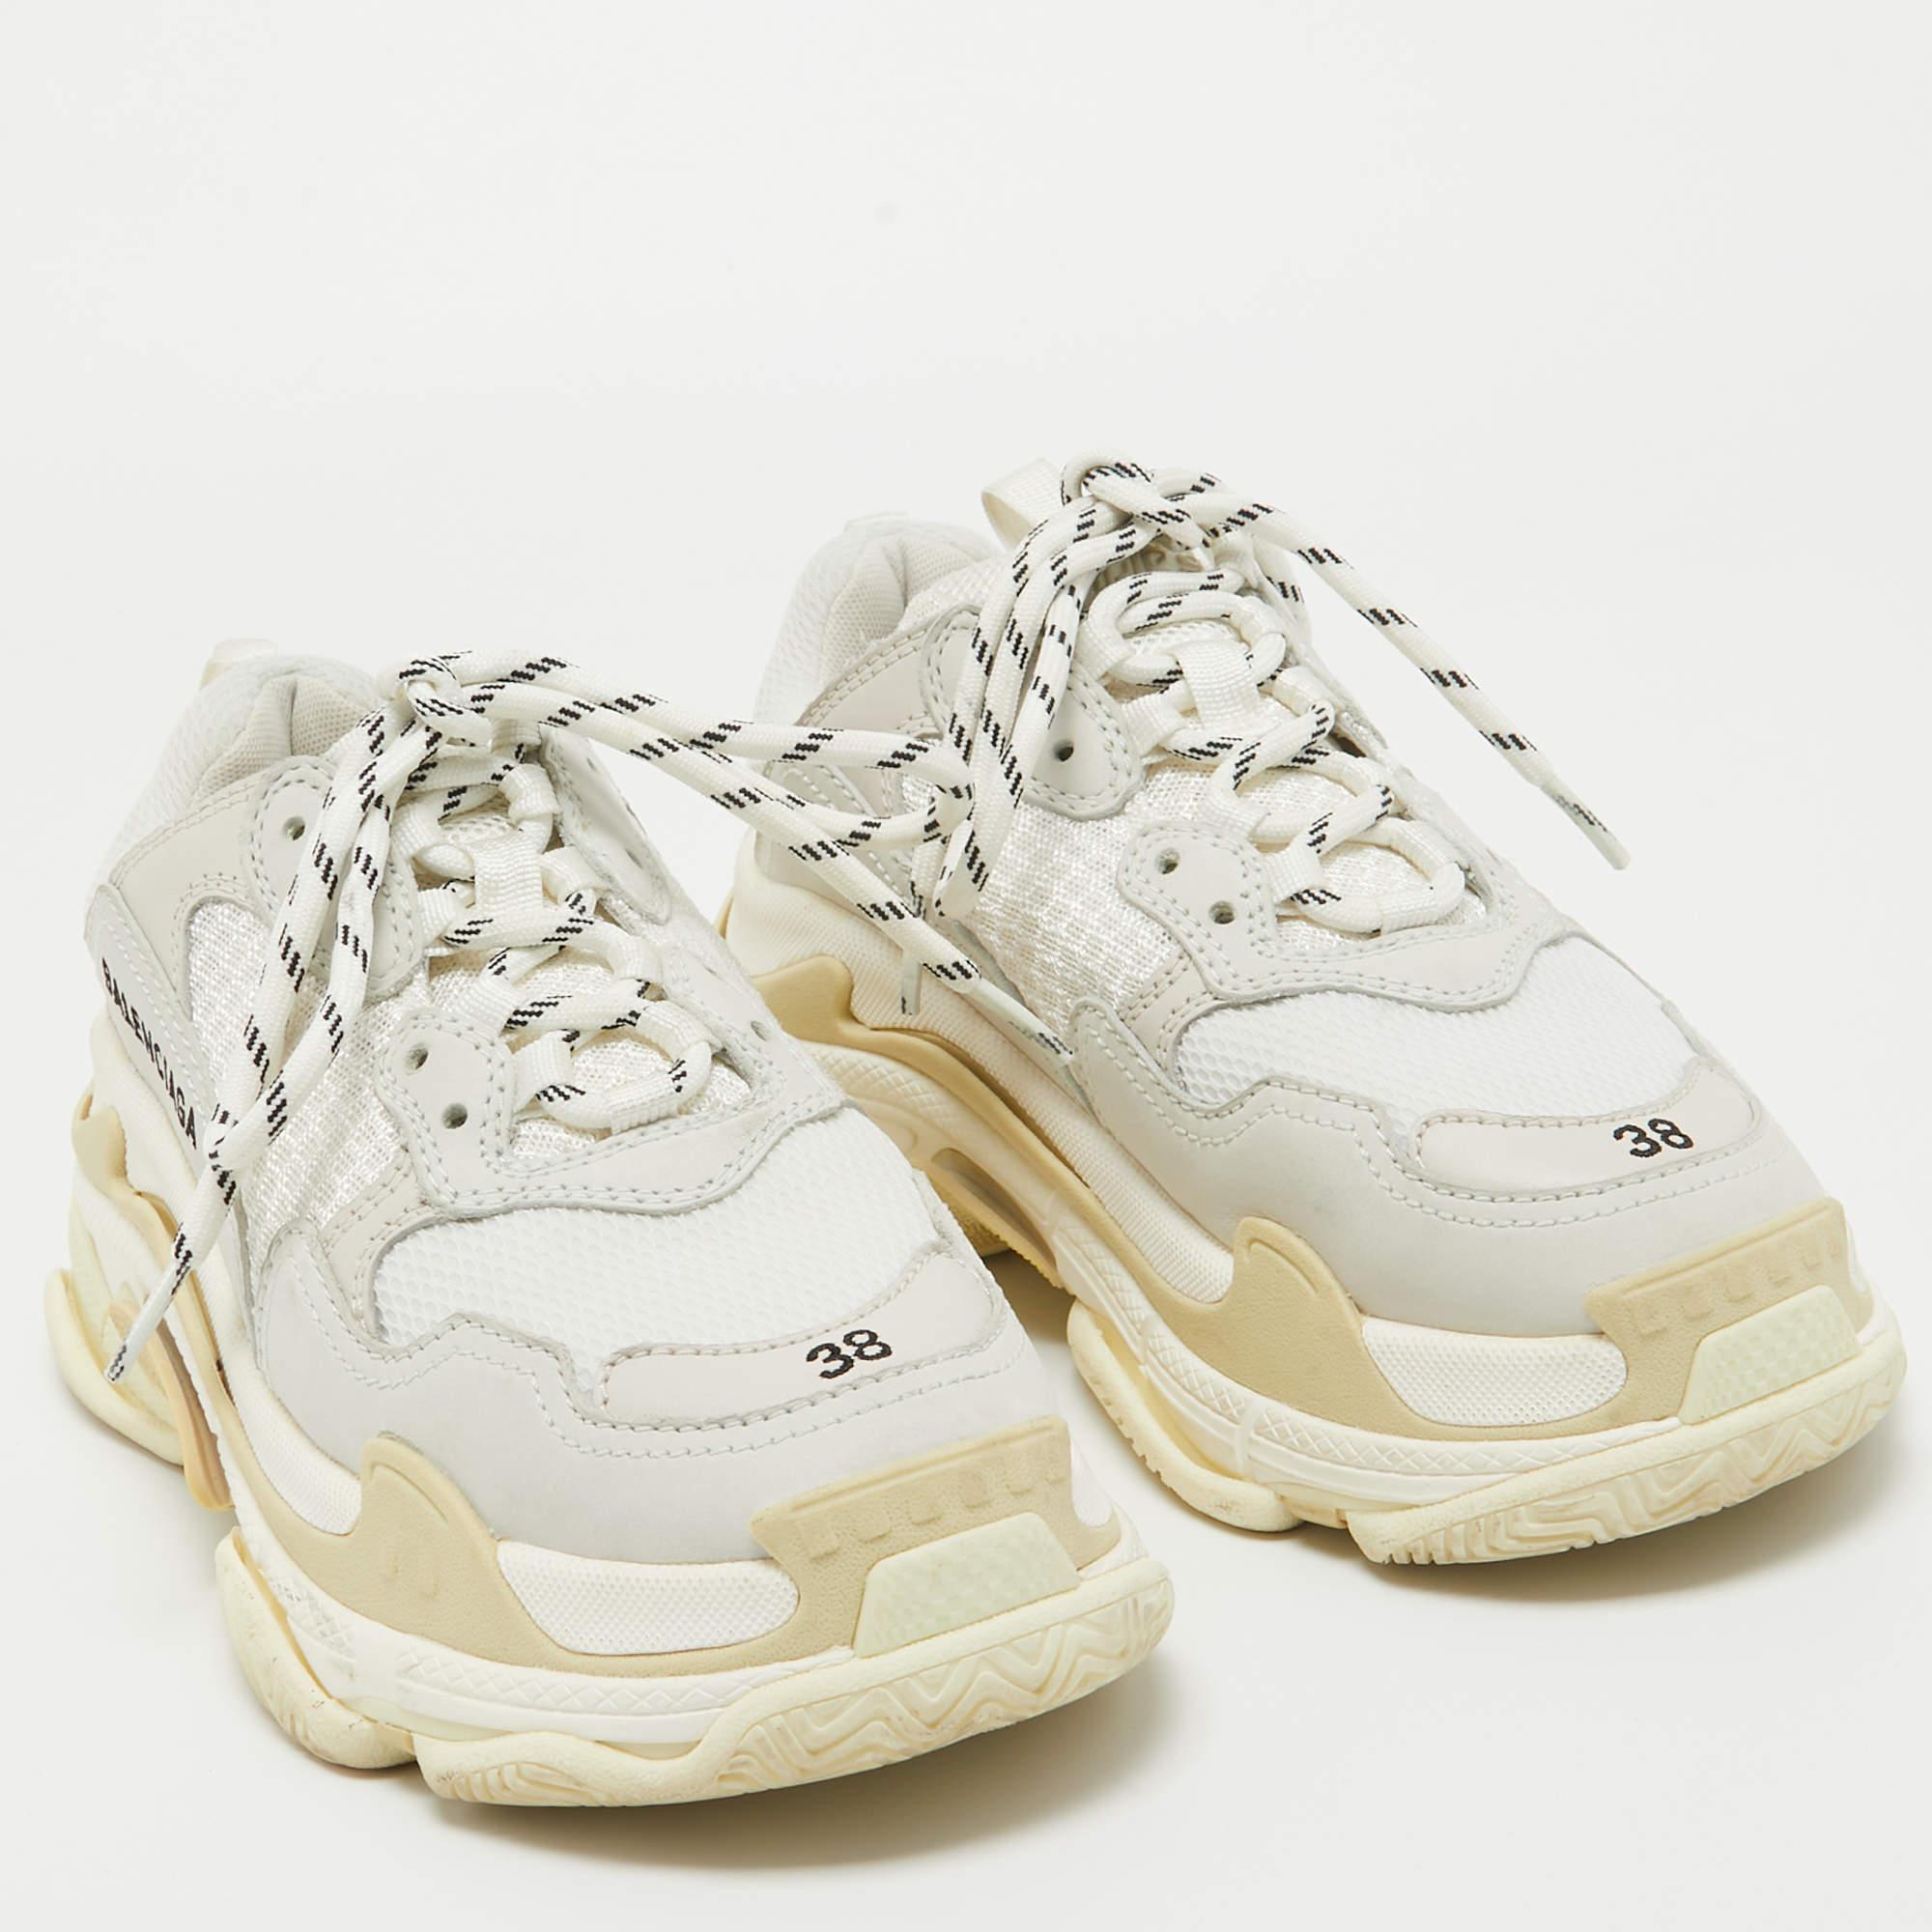 Balenciaga White/Grey Leather and Mesh Triple S Sneakers Size 38 2